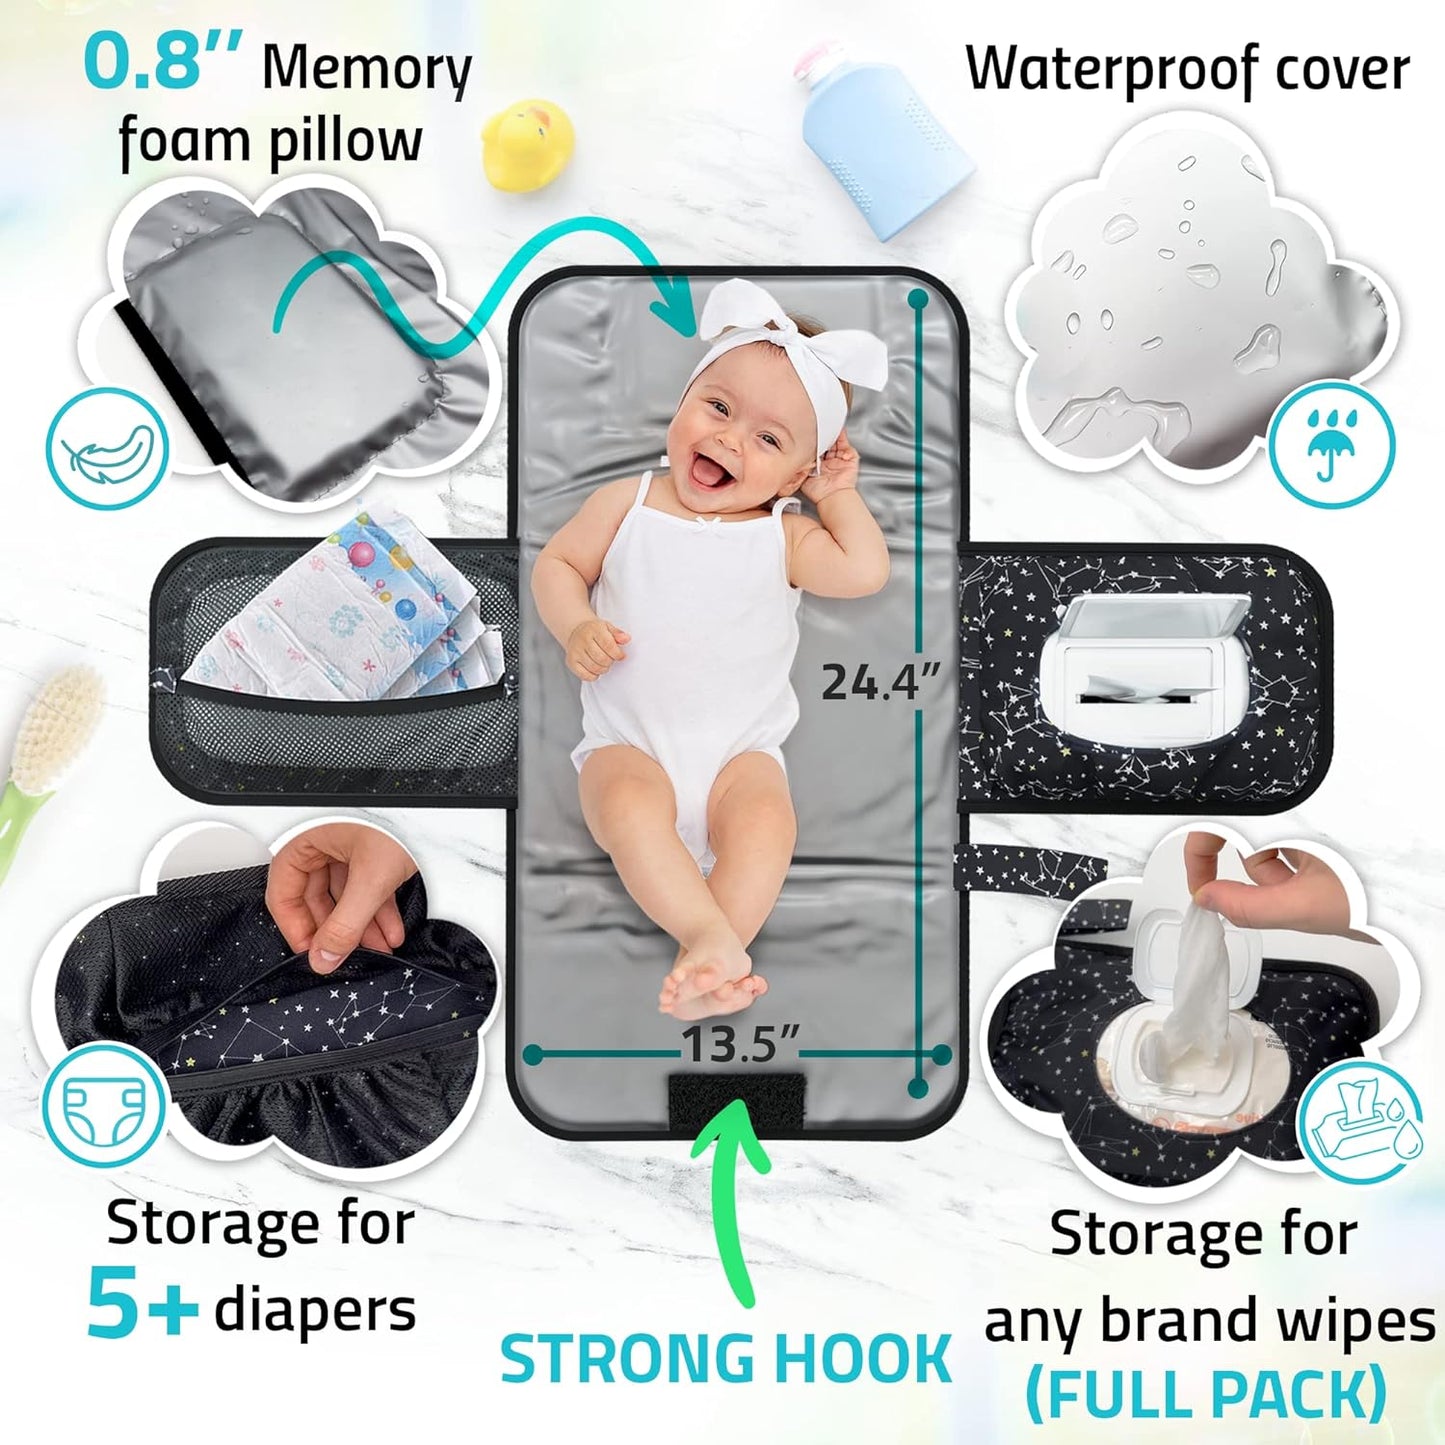 Premium Portable Diaper Changing Pad - Soft, Lightweight, and Waterproof